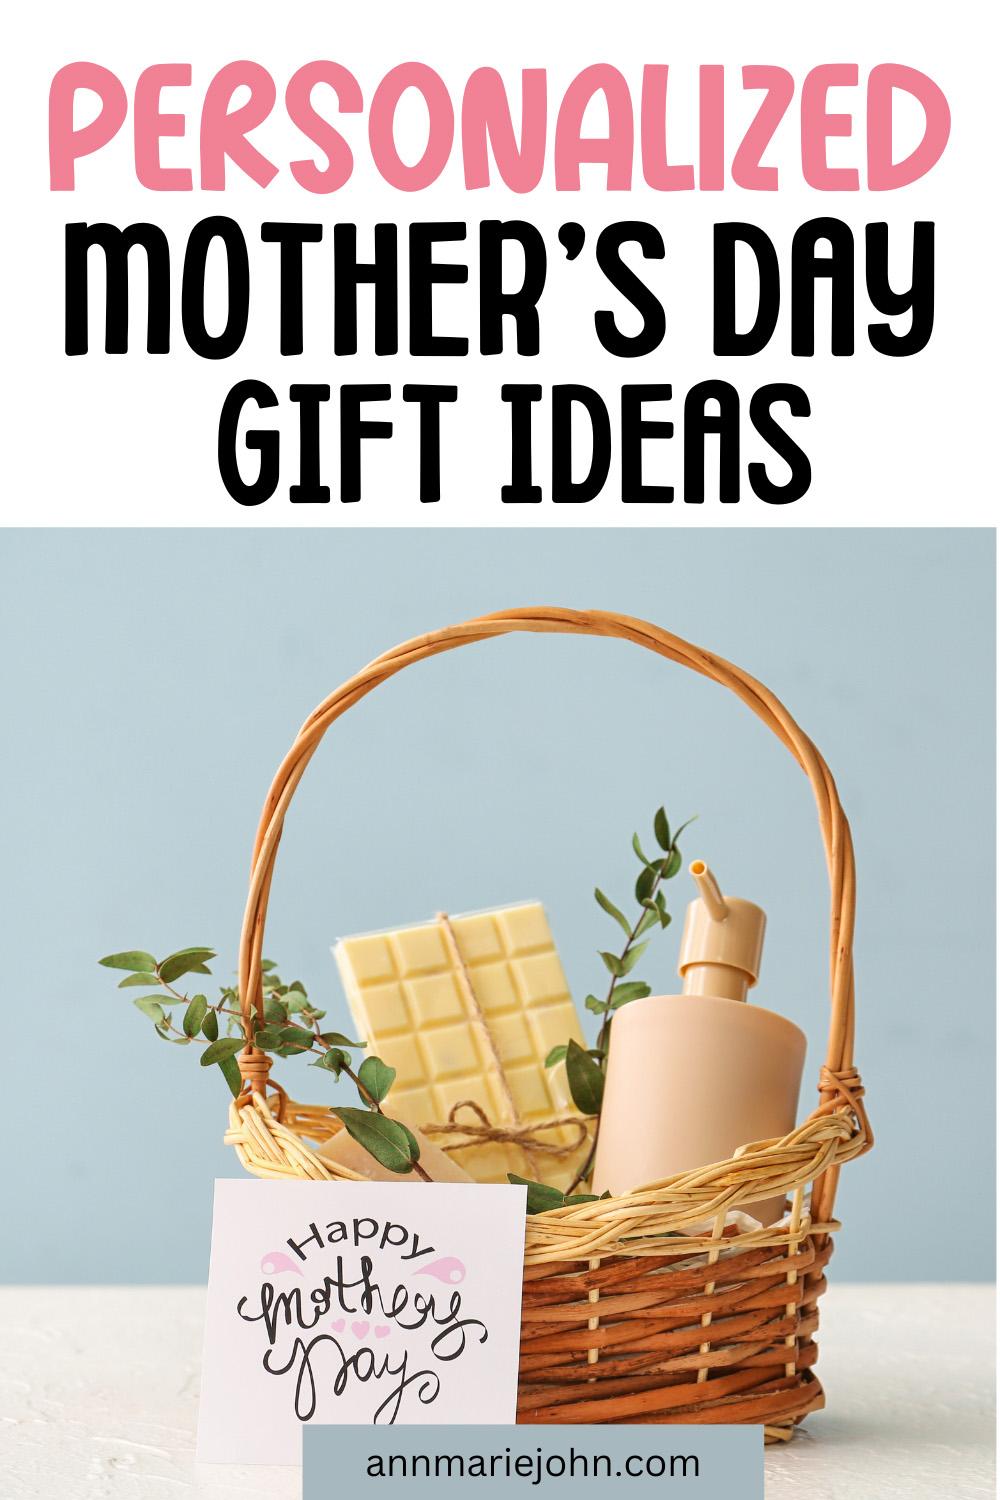 Personalized Mothers Day Gift Ideas